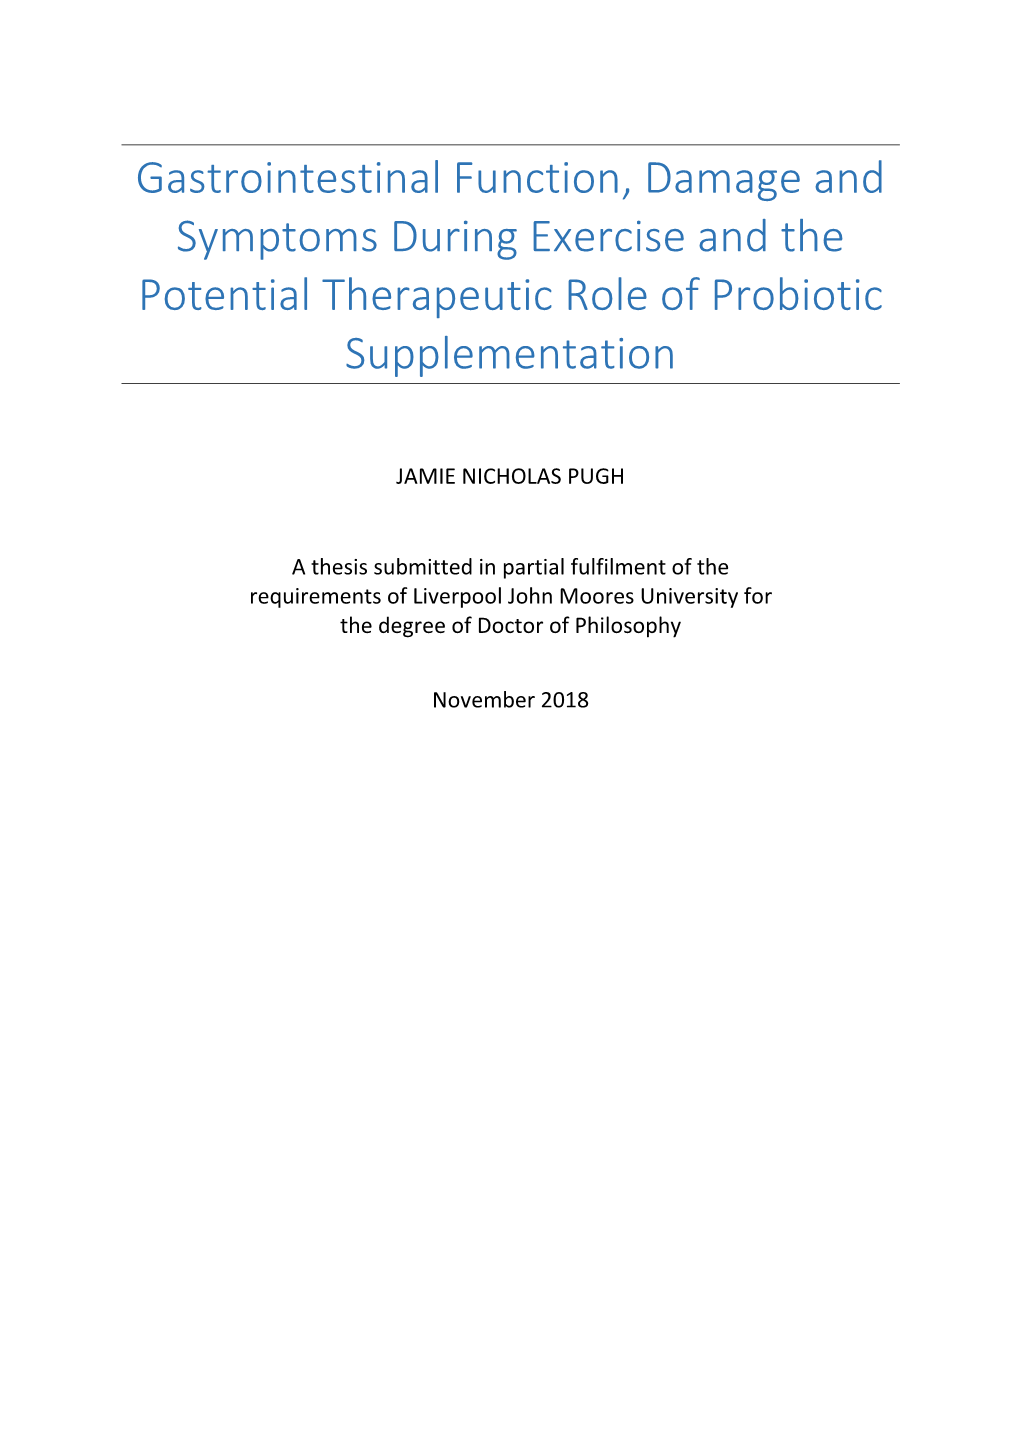 Gastrointestinal Function, Damage and Symptoms During Exercise and the Potential Therapeutic Role of Probiotic Supplementation